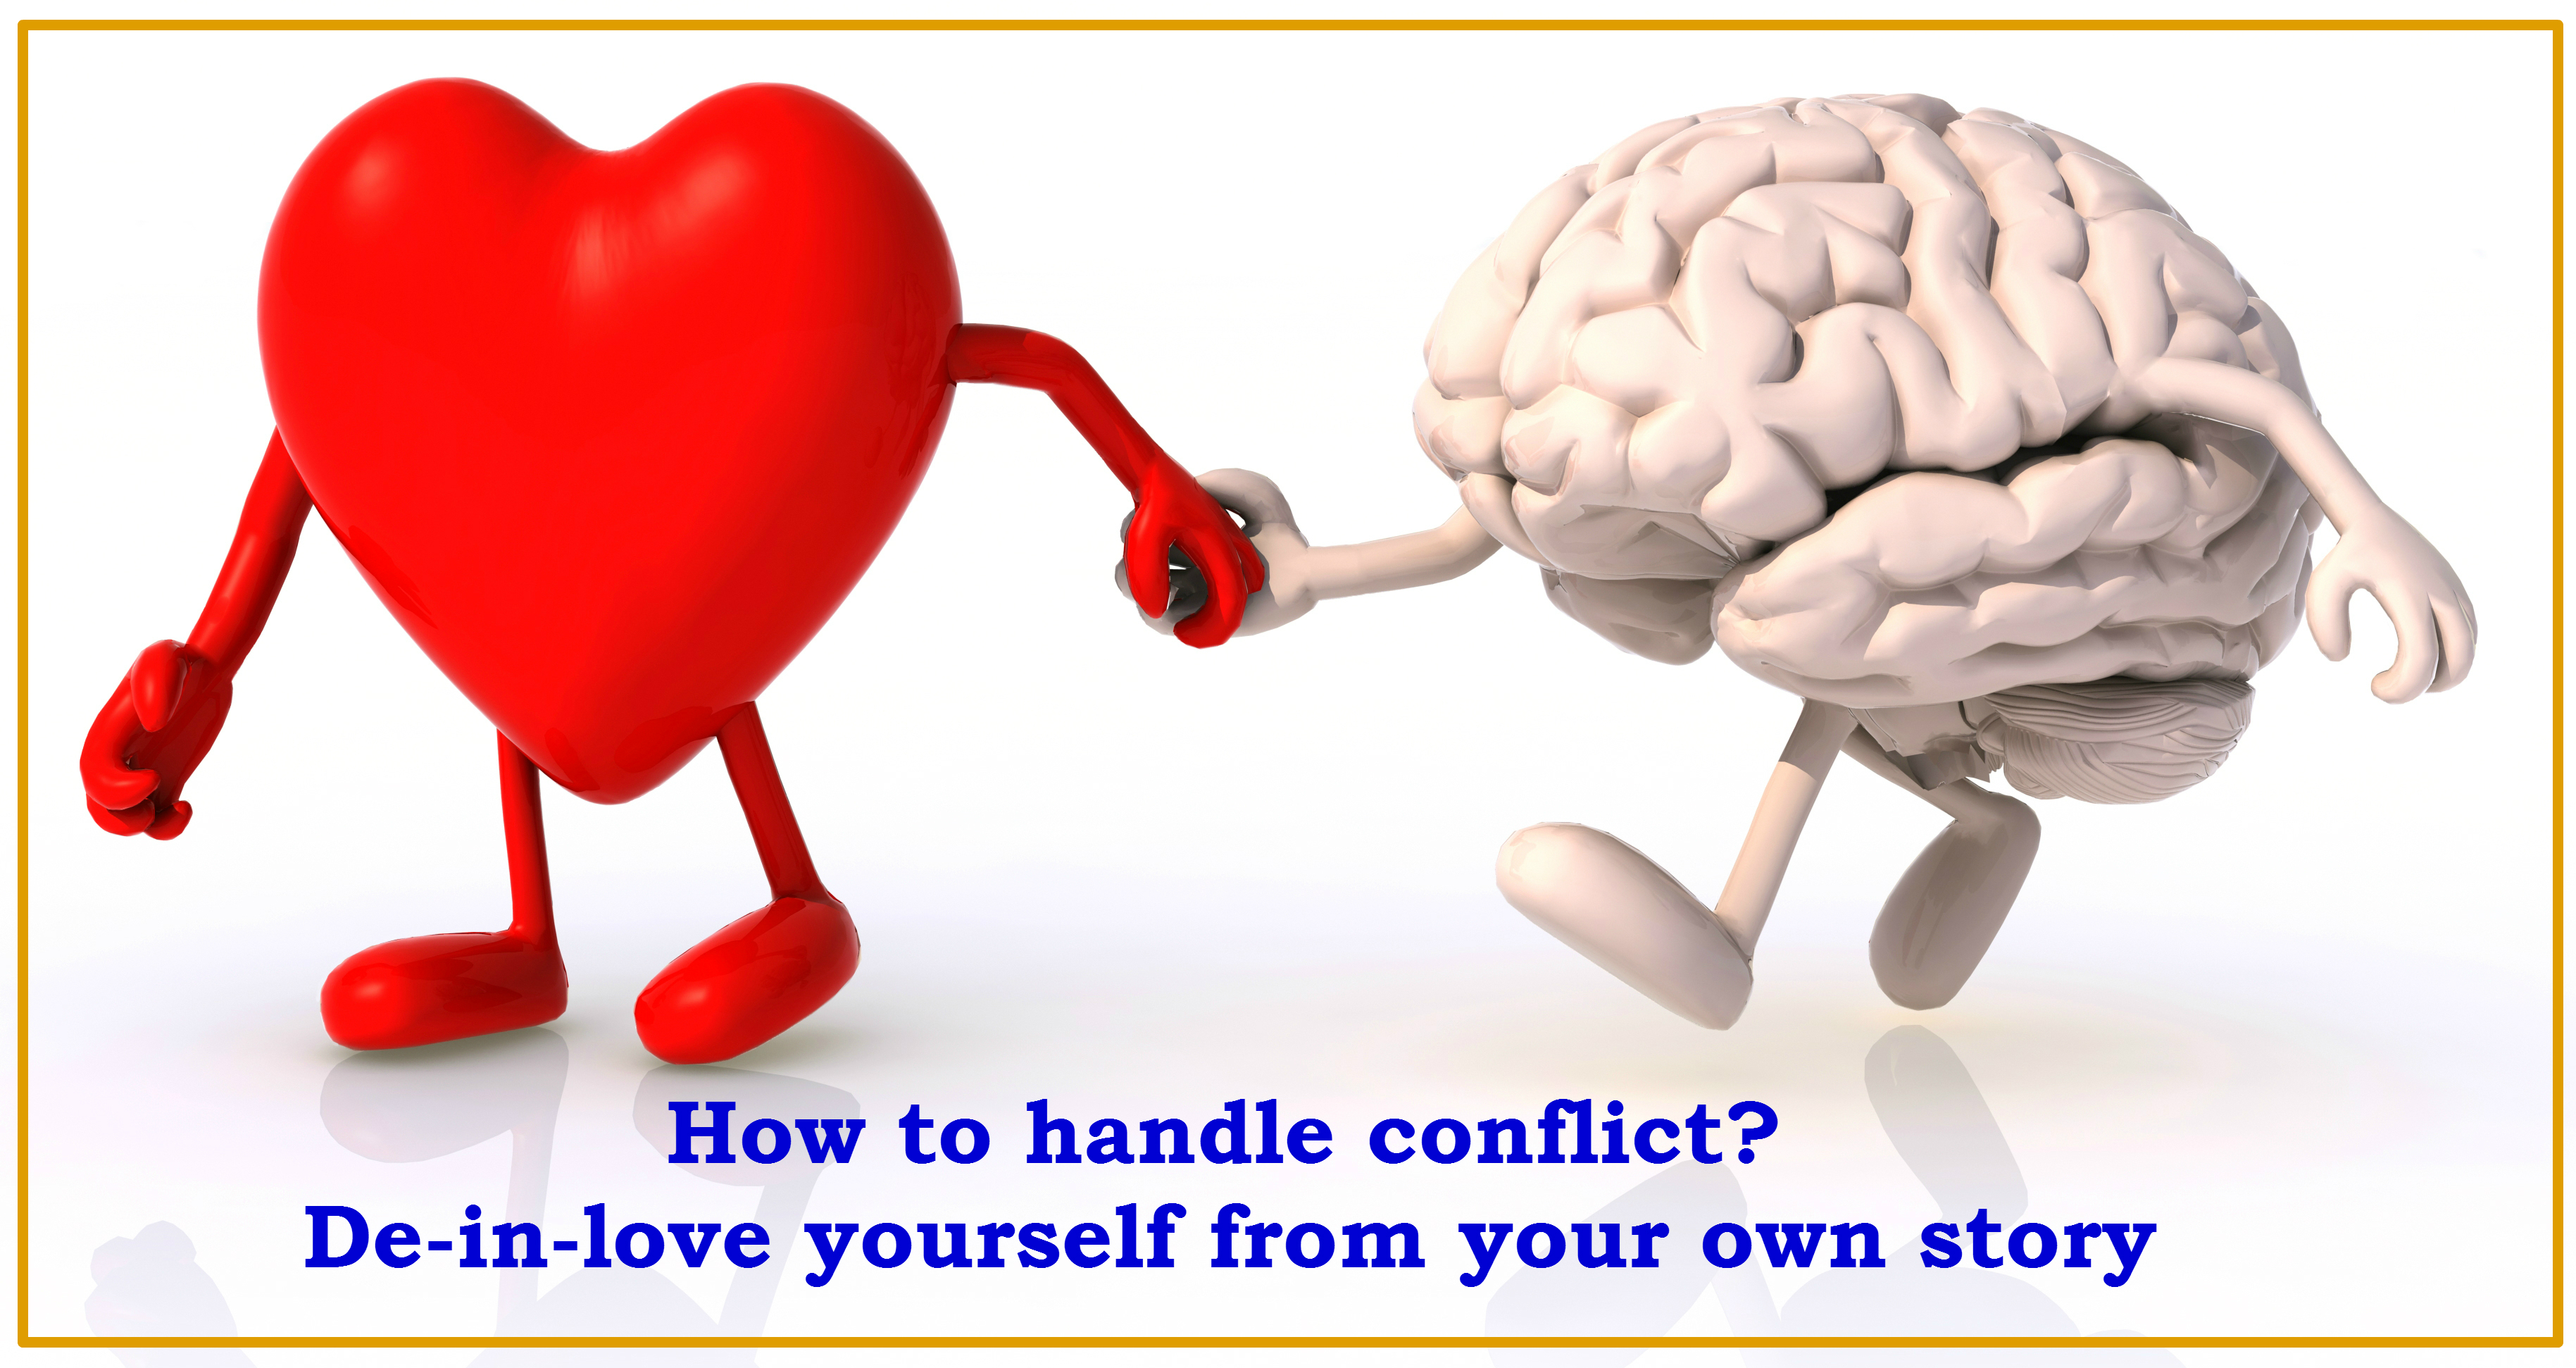 How to resolve conflict? De-in-love yourself from your own story